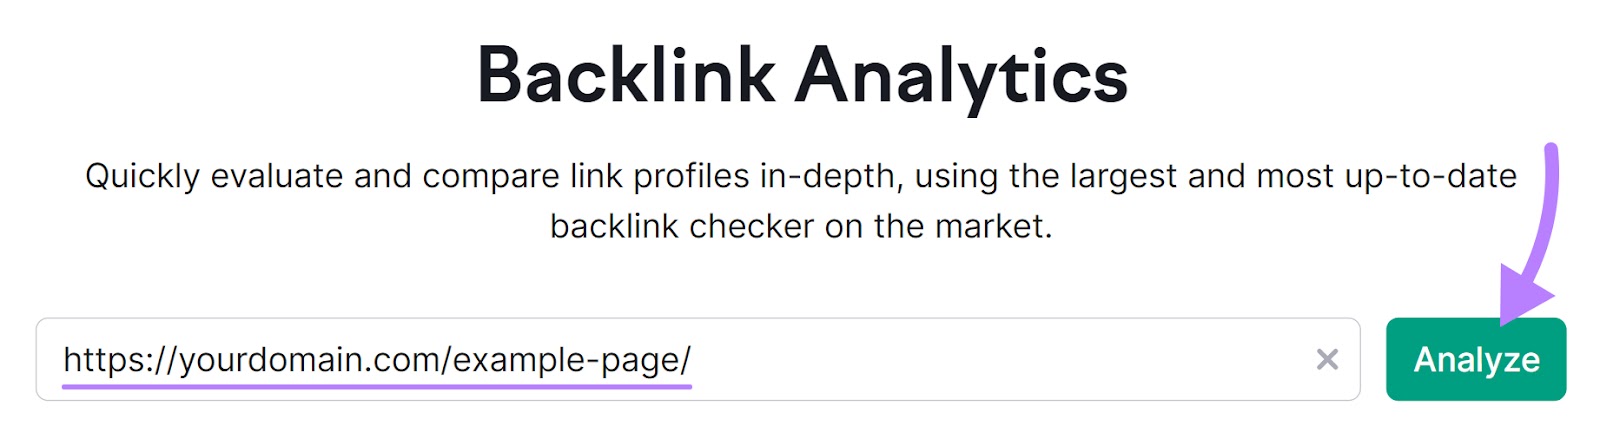 URL entered into the Backlink Analytics tool